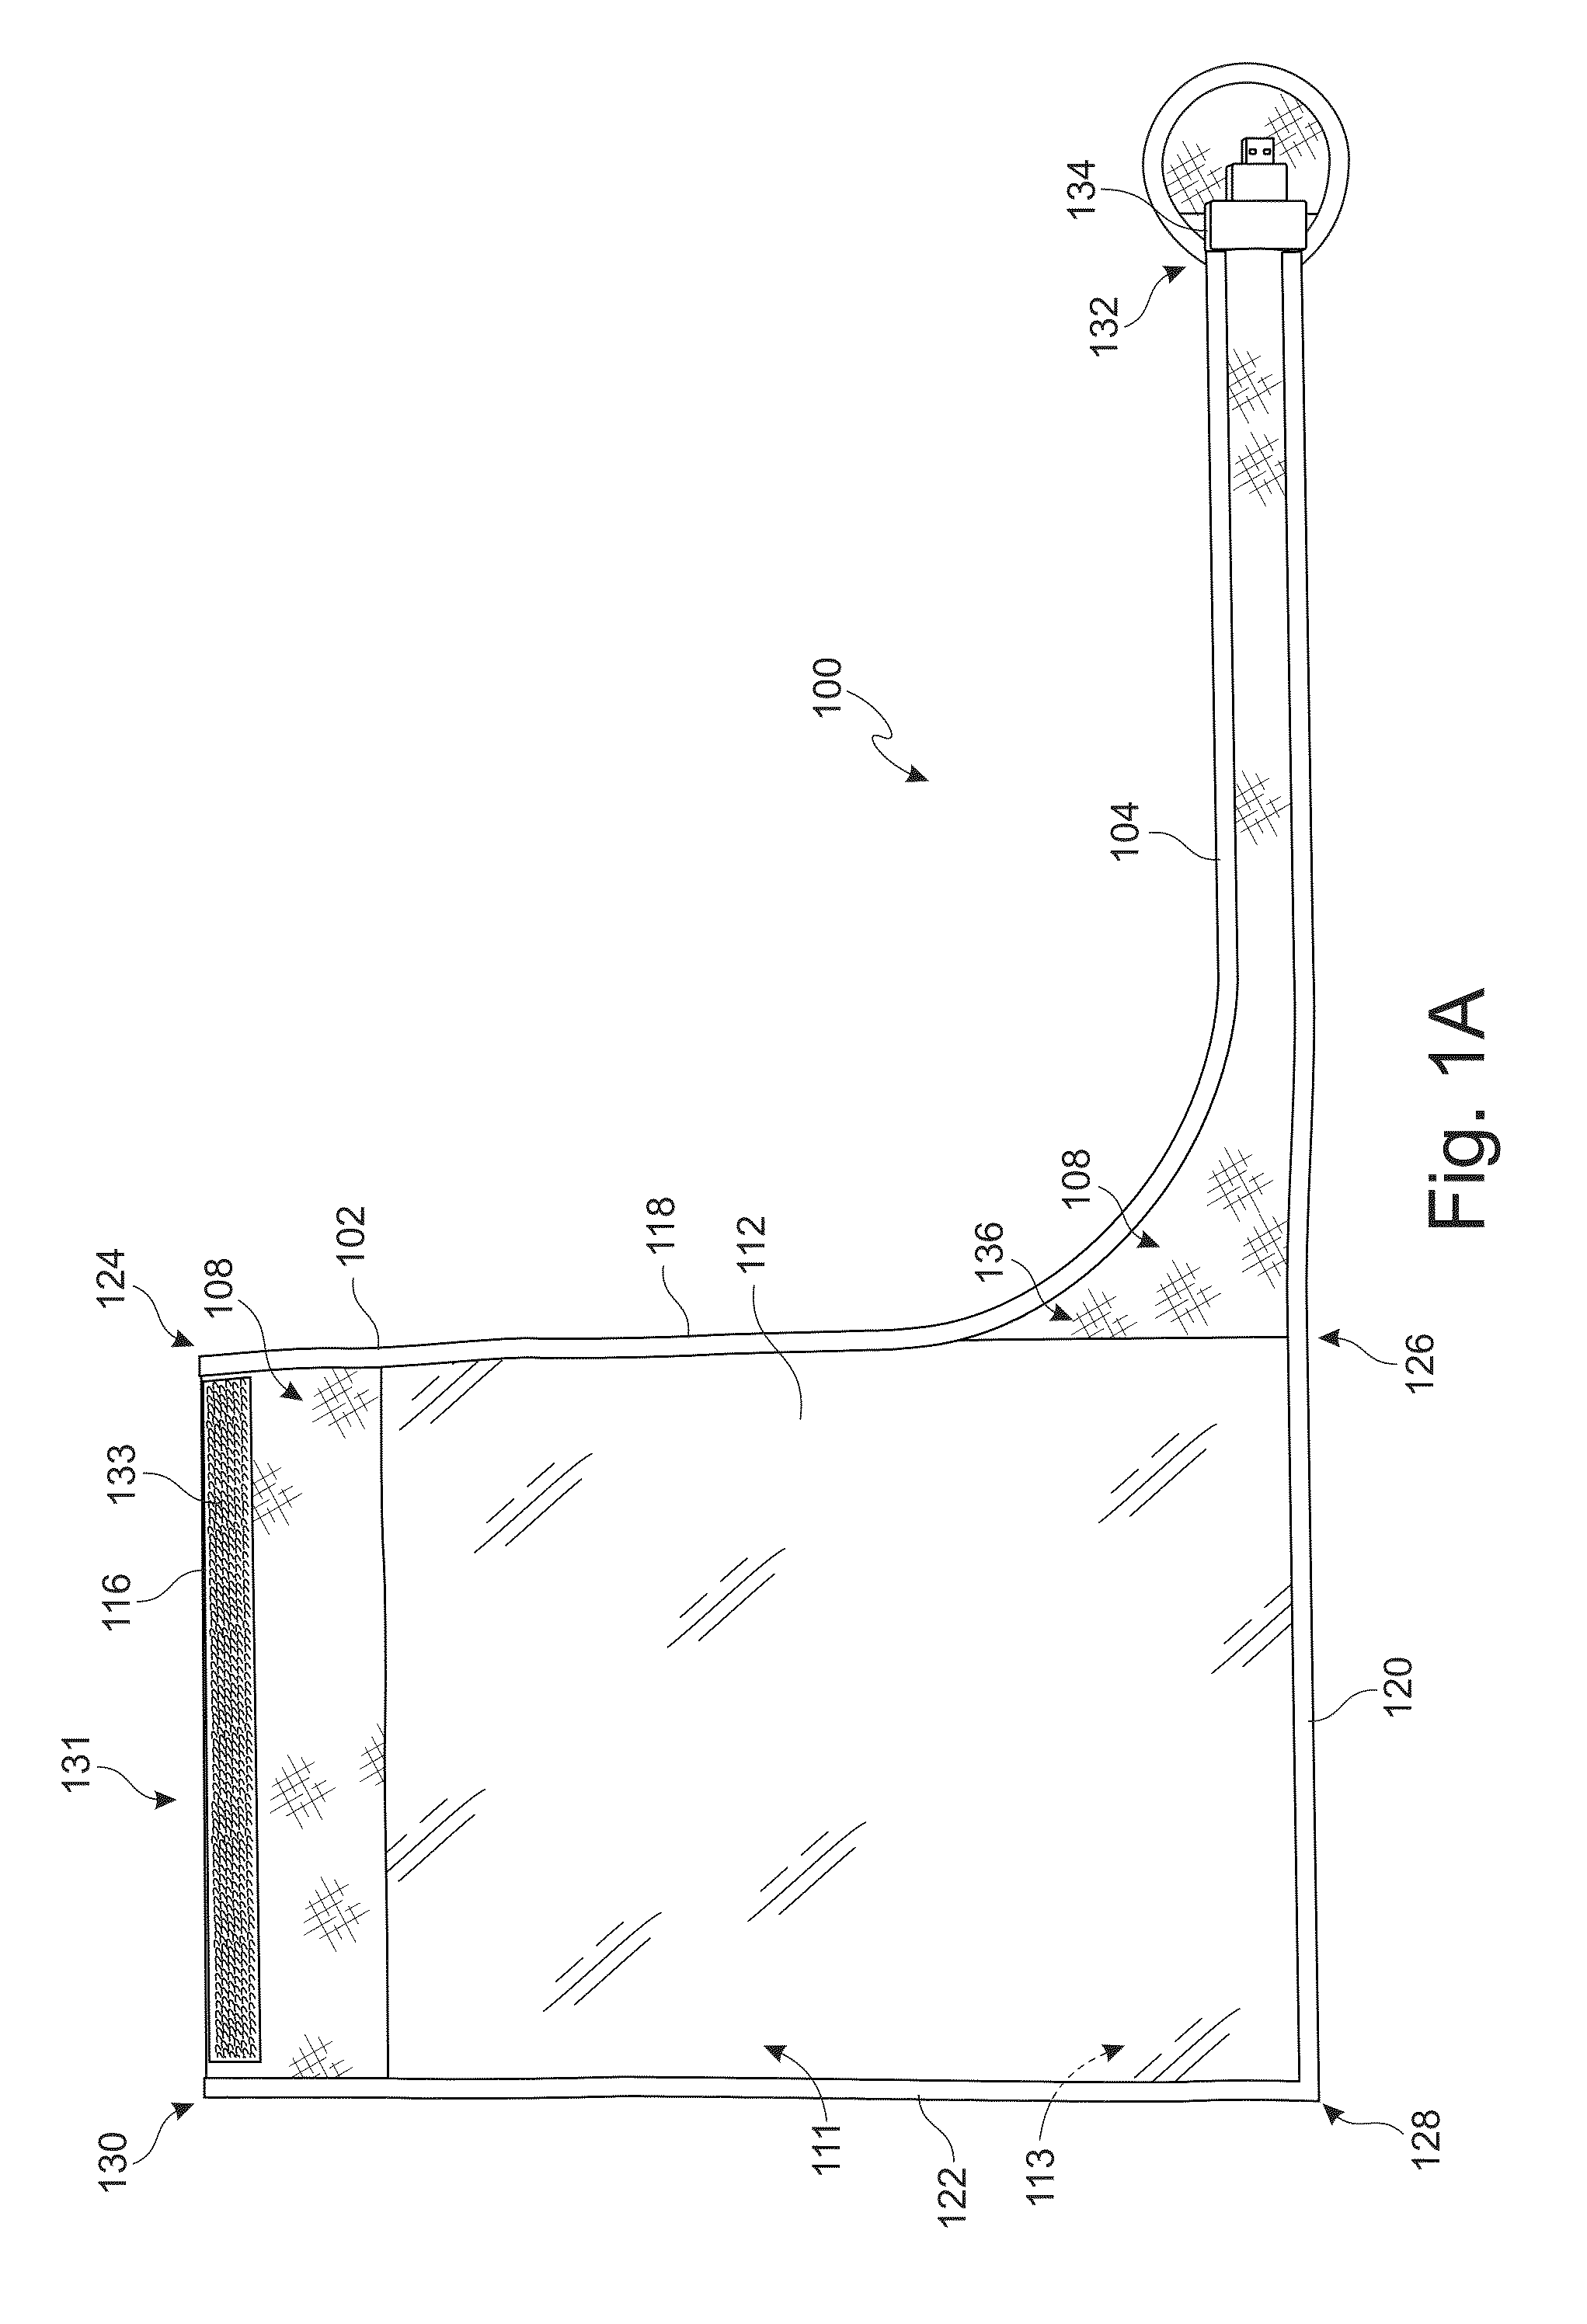 Portable electromagnetic interference shield with flexible cavity